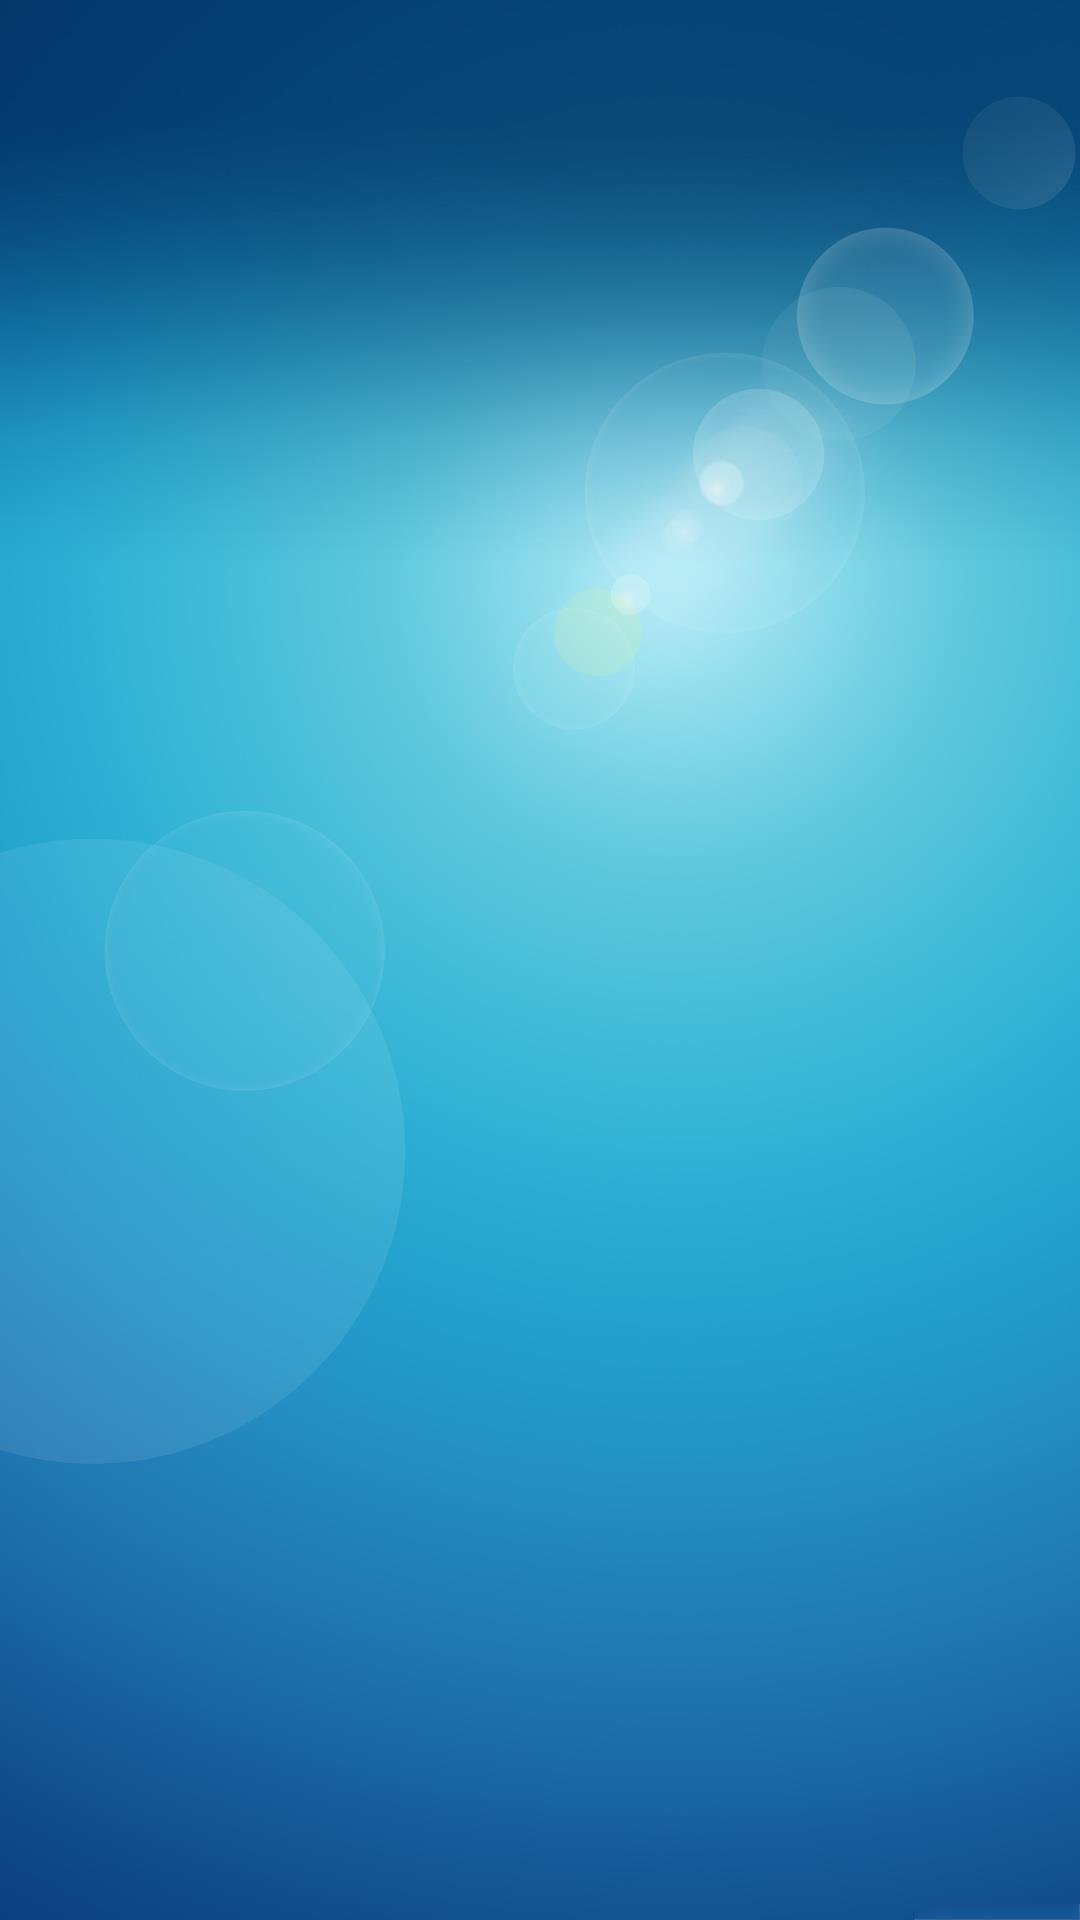 background image for android mobile applications 7. Background